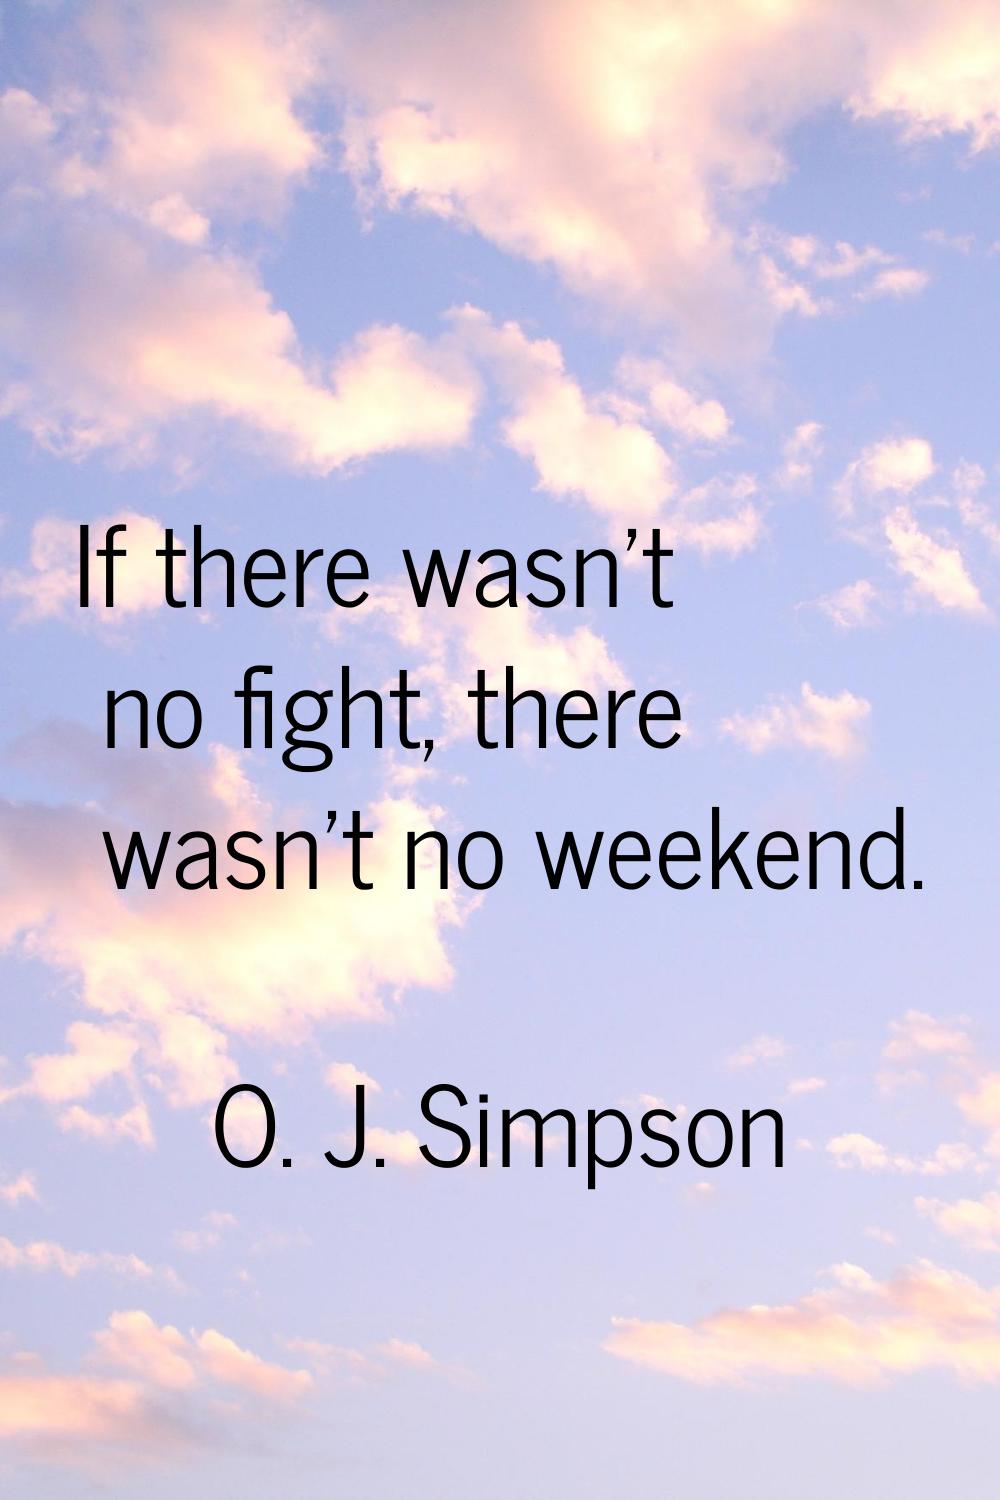 If there wasn't no fight, there wasn't no weekend.